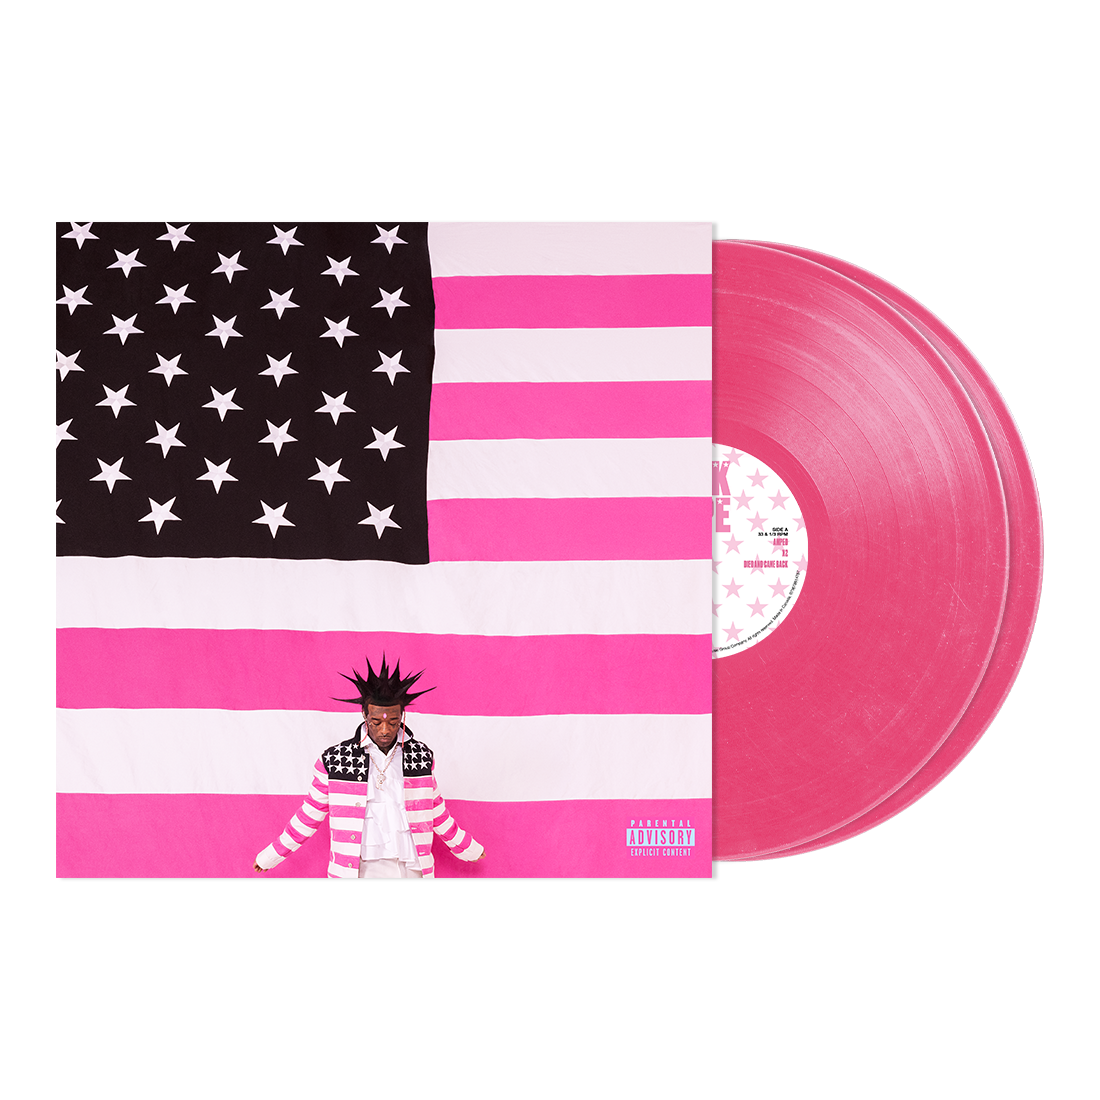 Back To Black - Exclusive Limited Edition Pink Vinyl LP